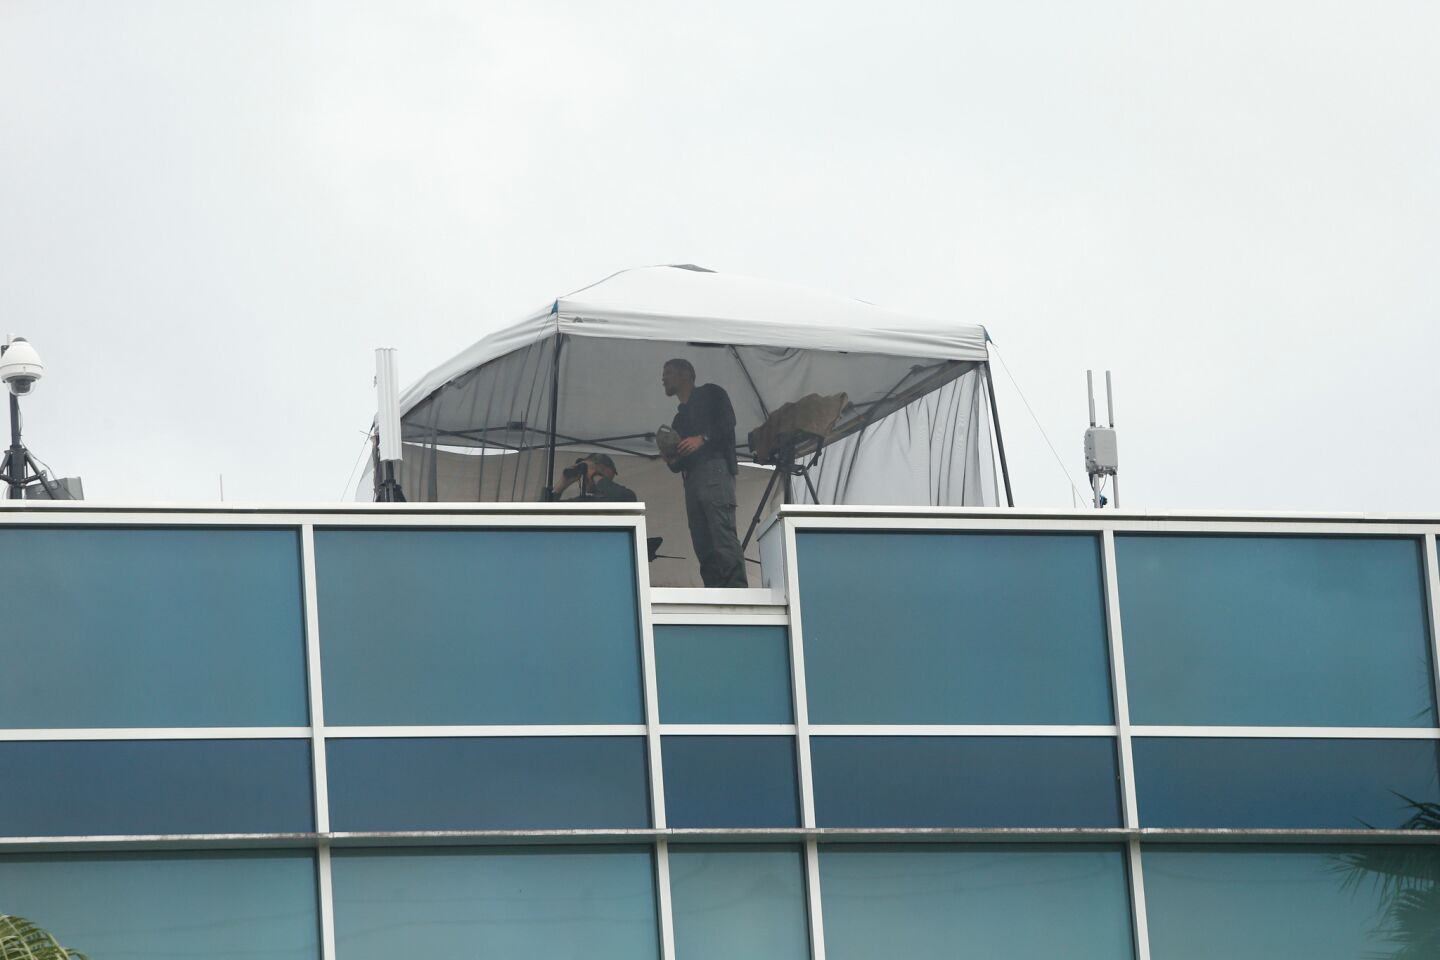 Police on a nearby rooftop monitor the scene at the site of the speech on the University of Florida campus.